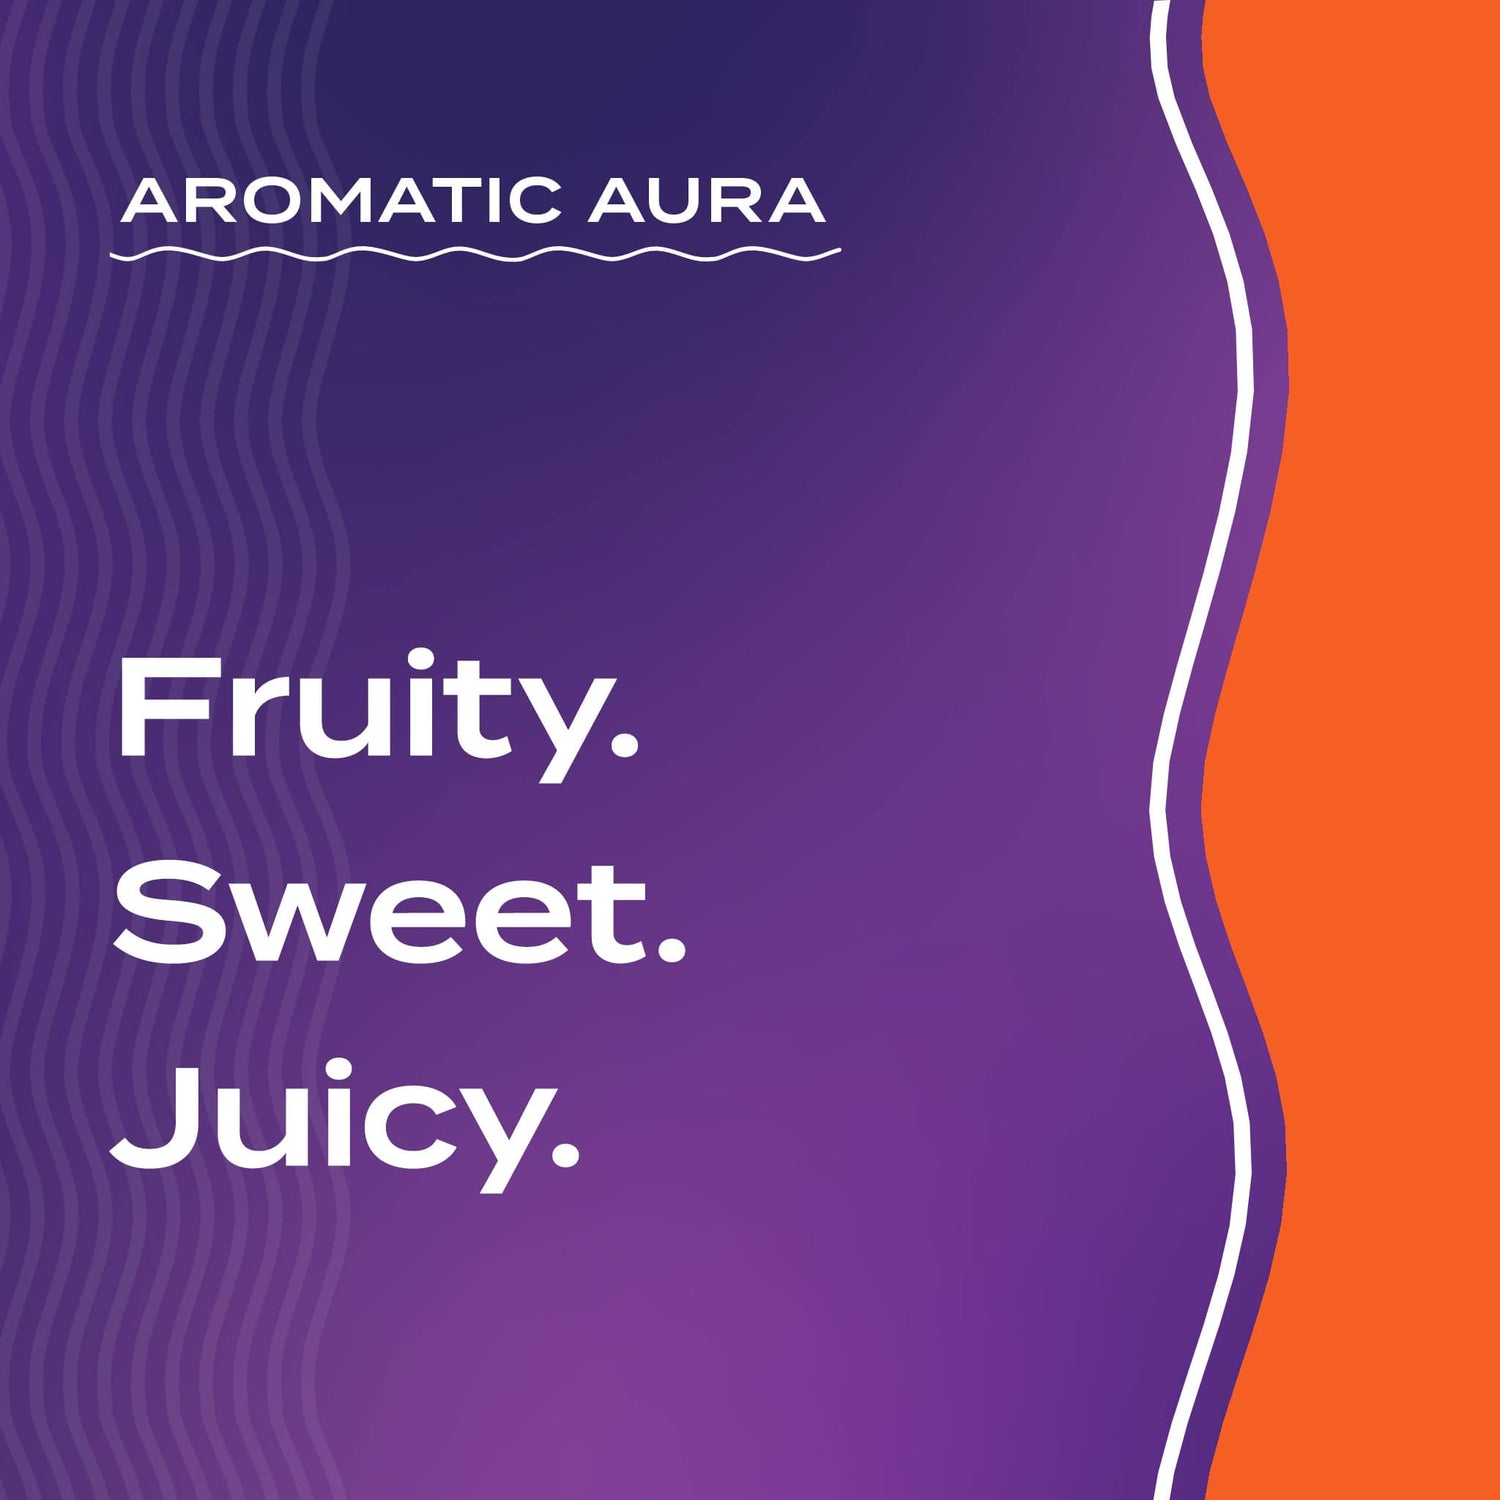 Text graphic depicting the aromatic aroma of Tangerine-Orange: Fruity, Sweet, Juicy.